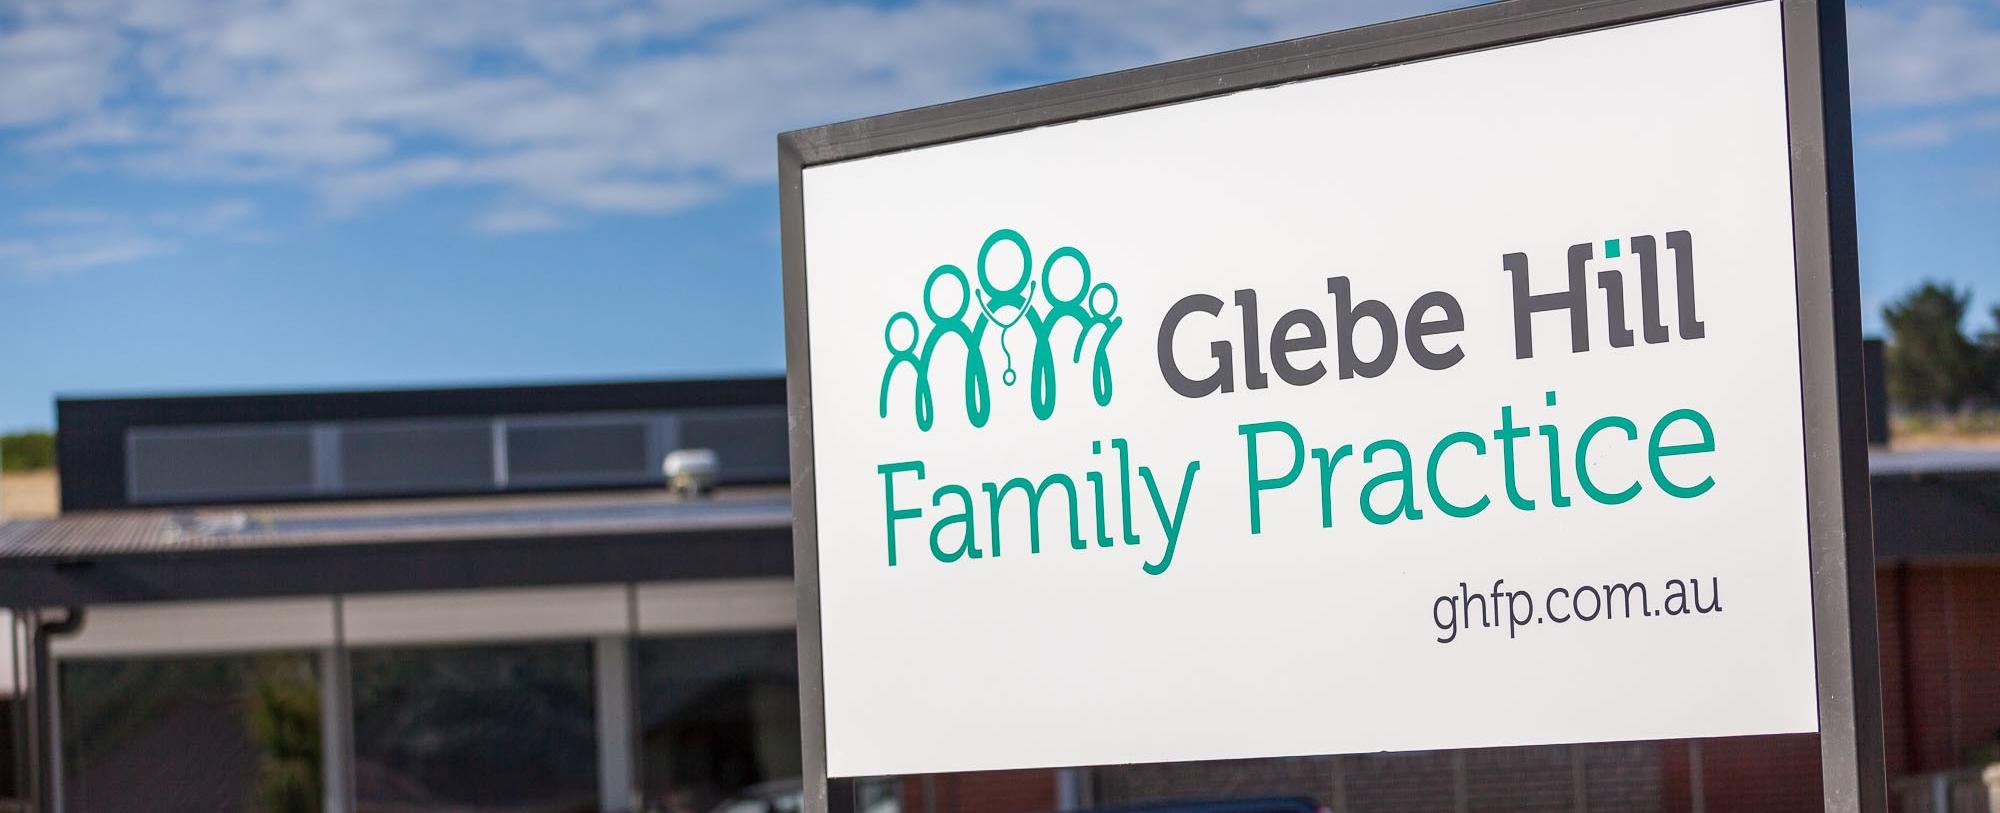 Glebe Hill Family Practice - Signage at entrance